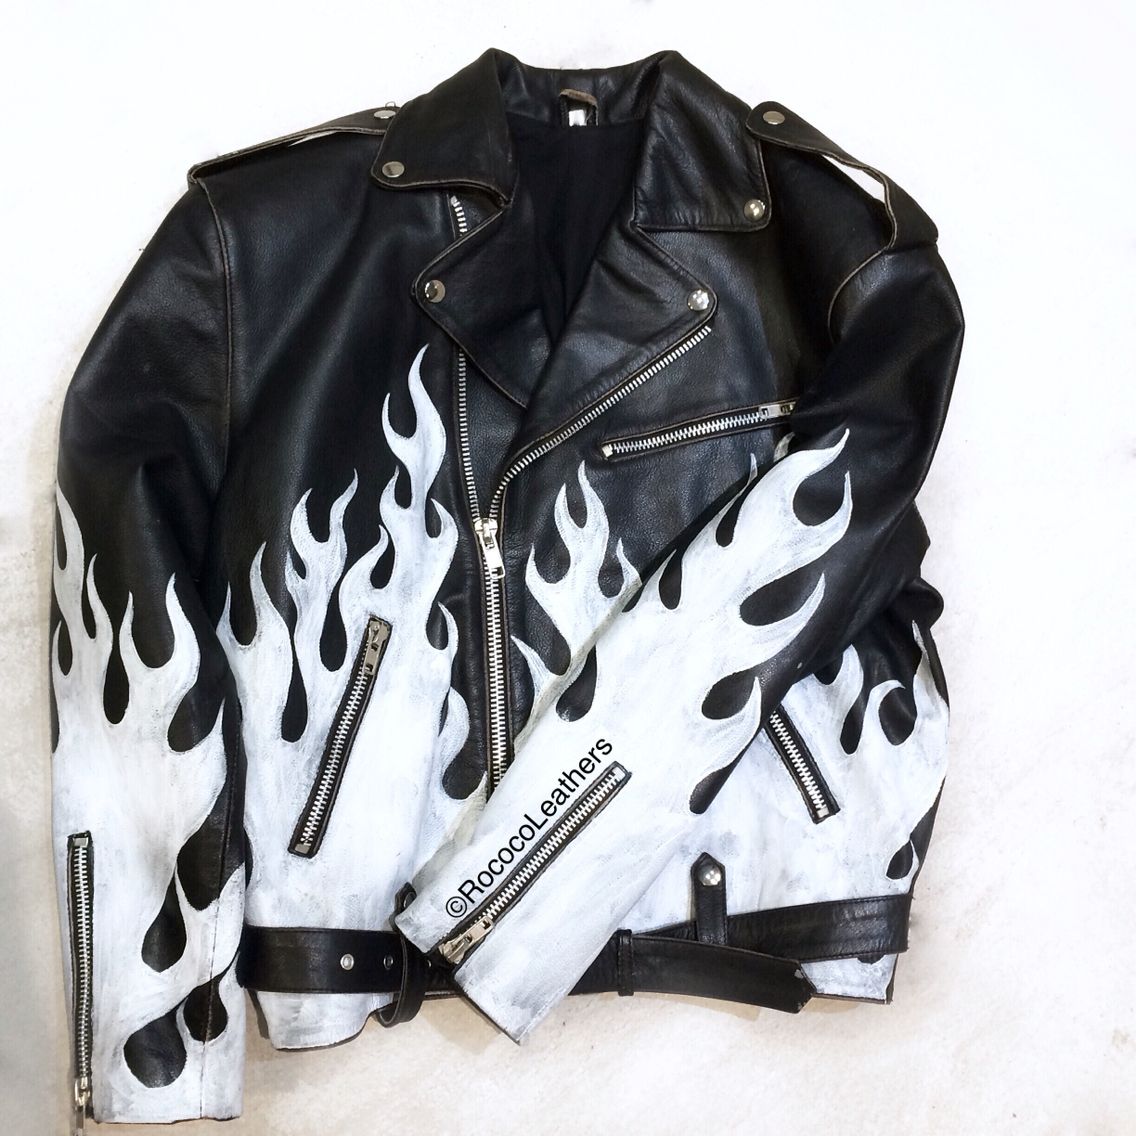 Choose perfect style with custom leather jackets